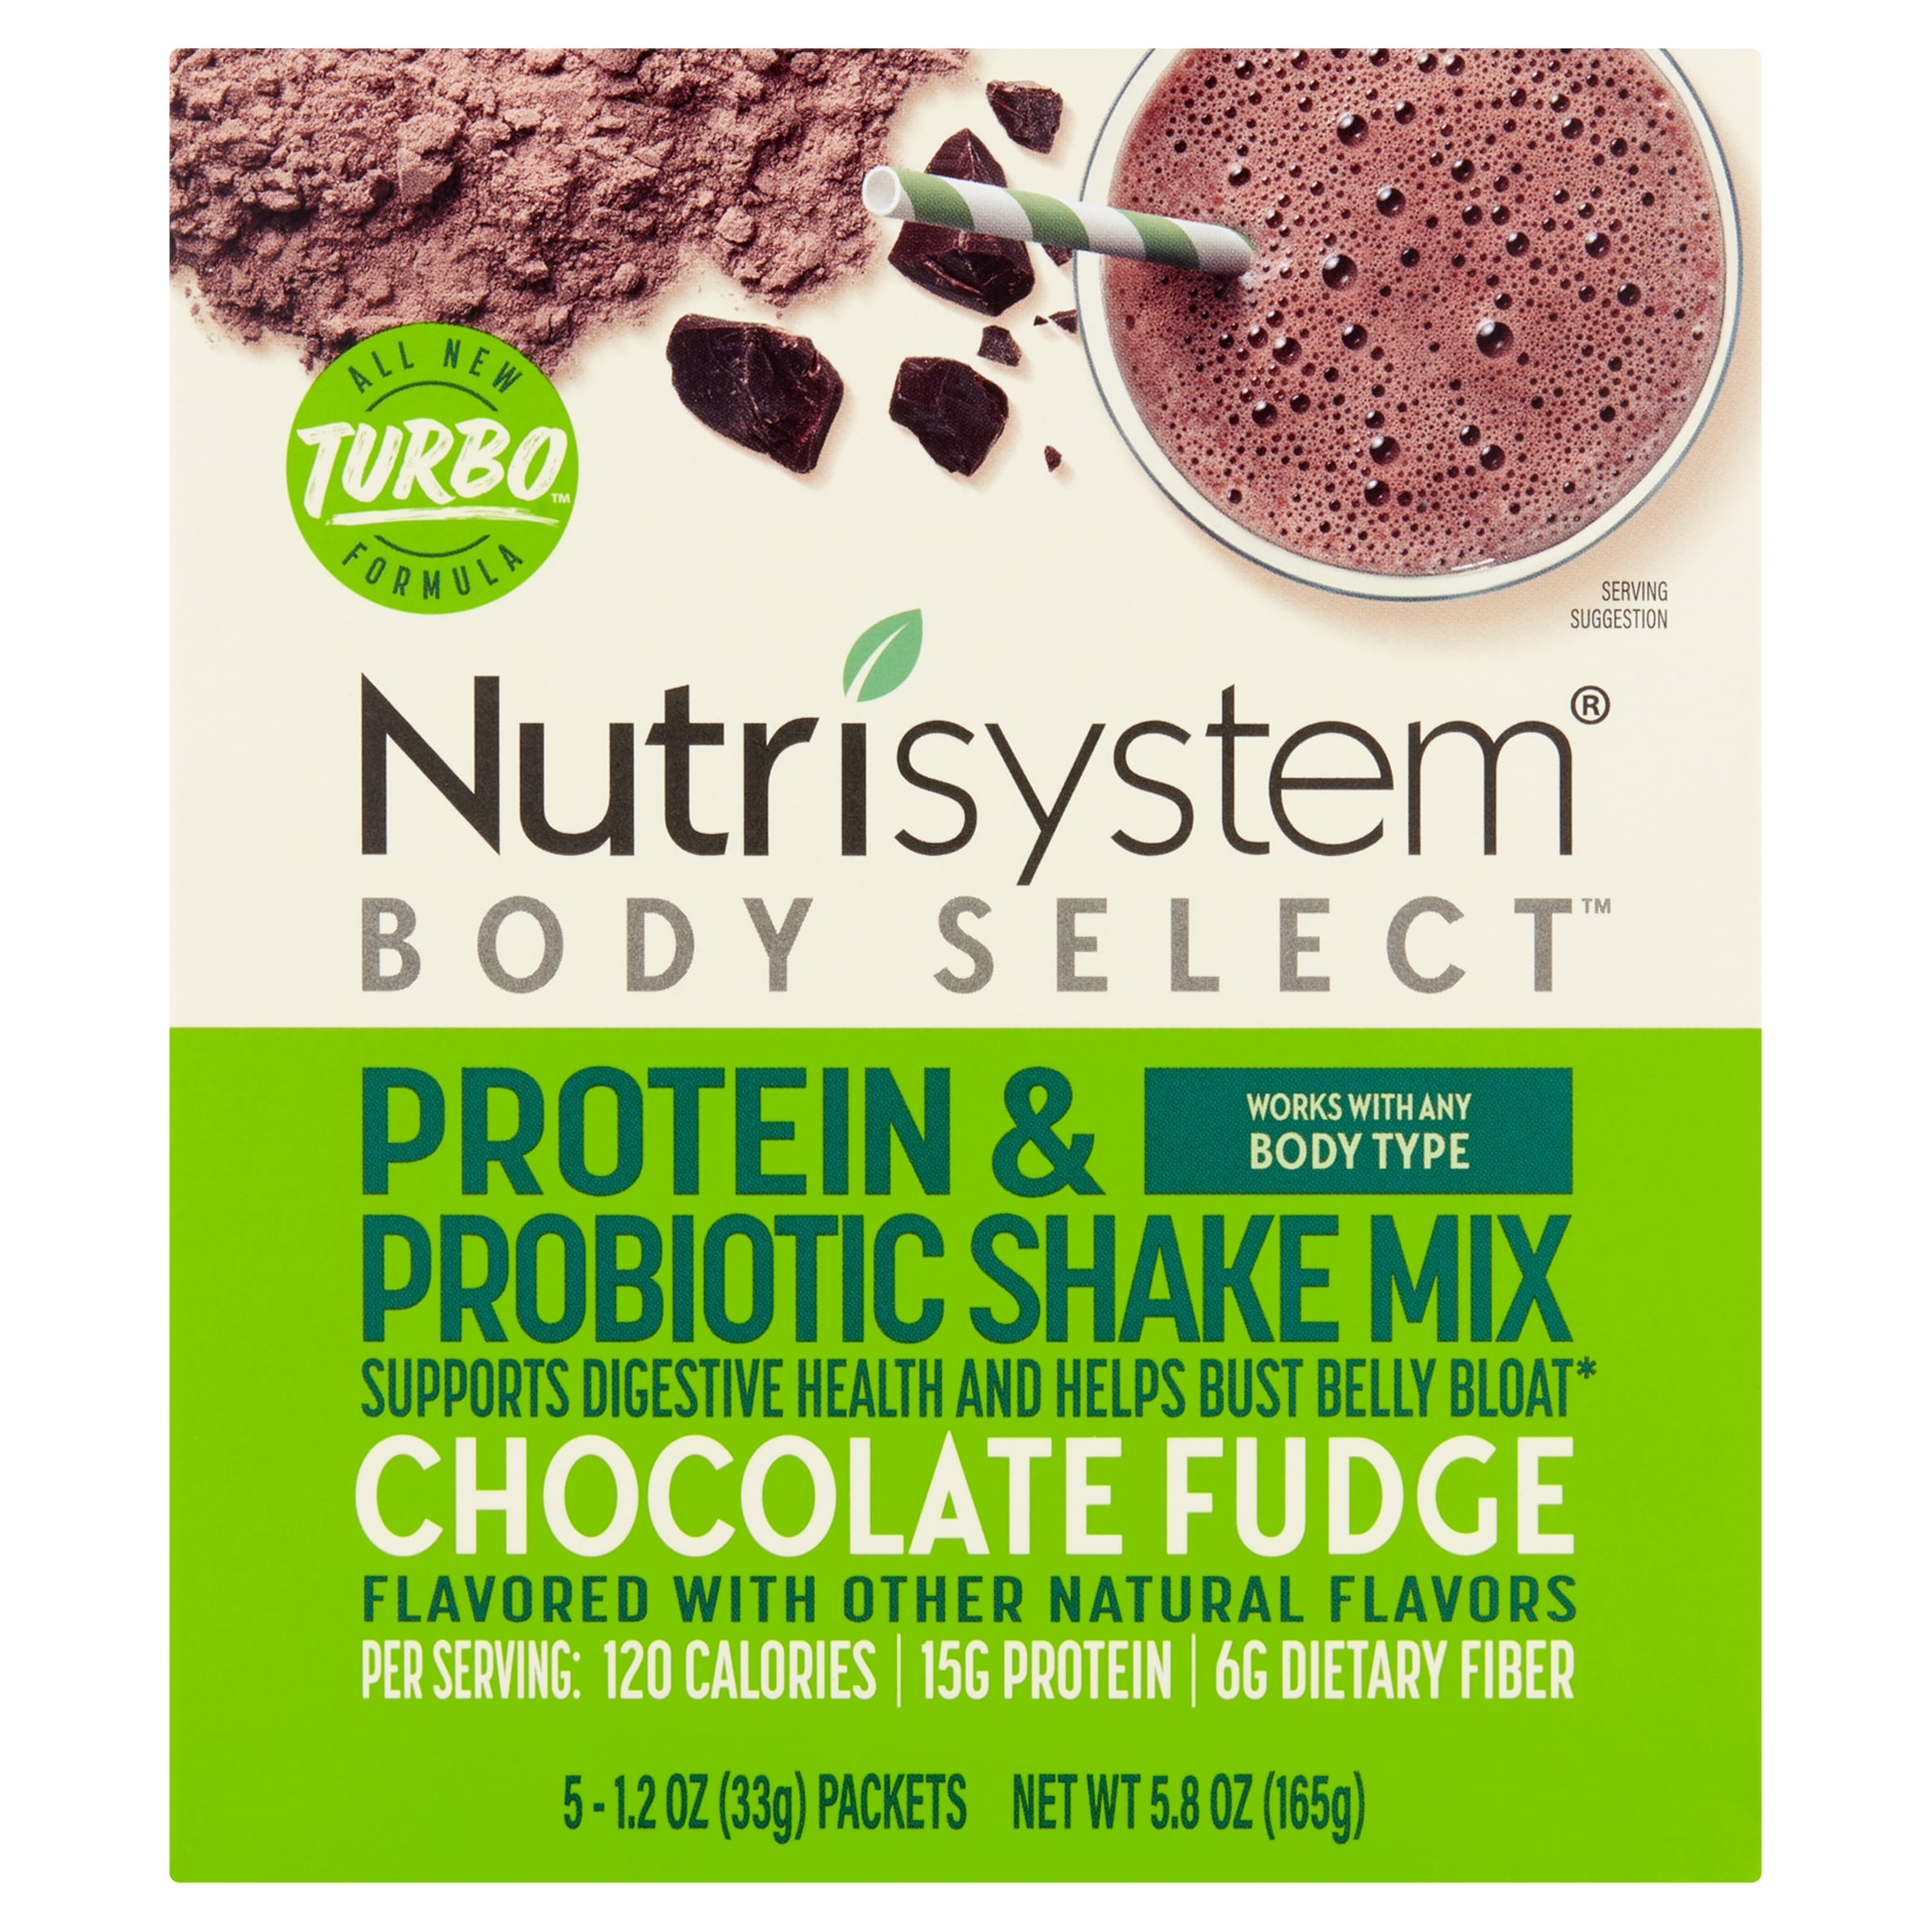 Nutrisystem PROSYNC Shake Mix Chocolate Fudge Protein & Probiotics - 2  Containers - 16.3 oz. each - 28 Servings for sale online